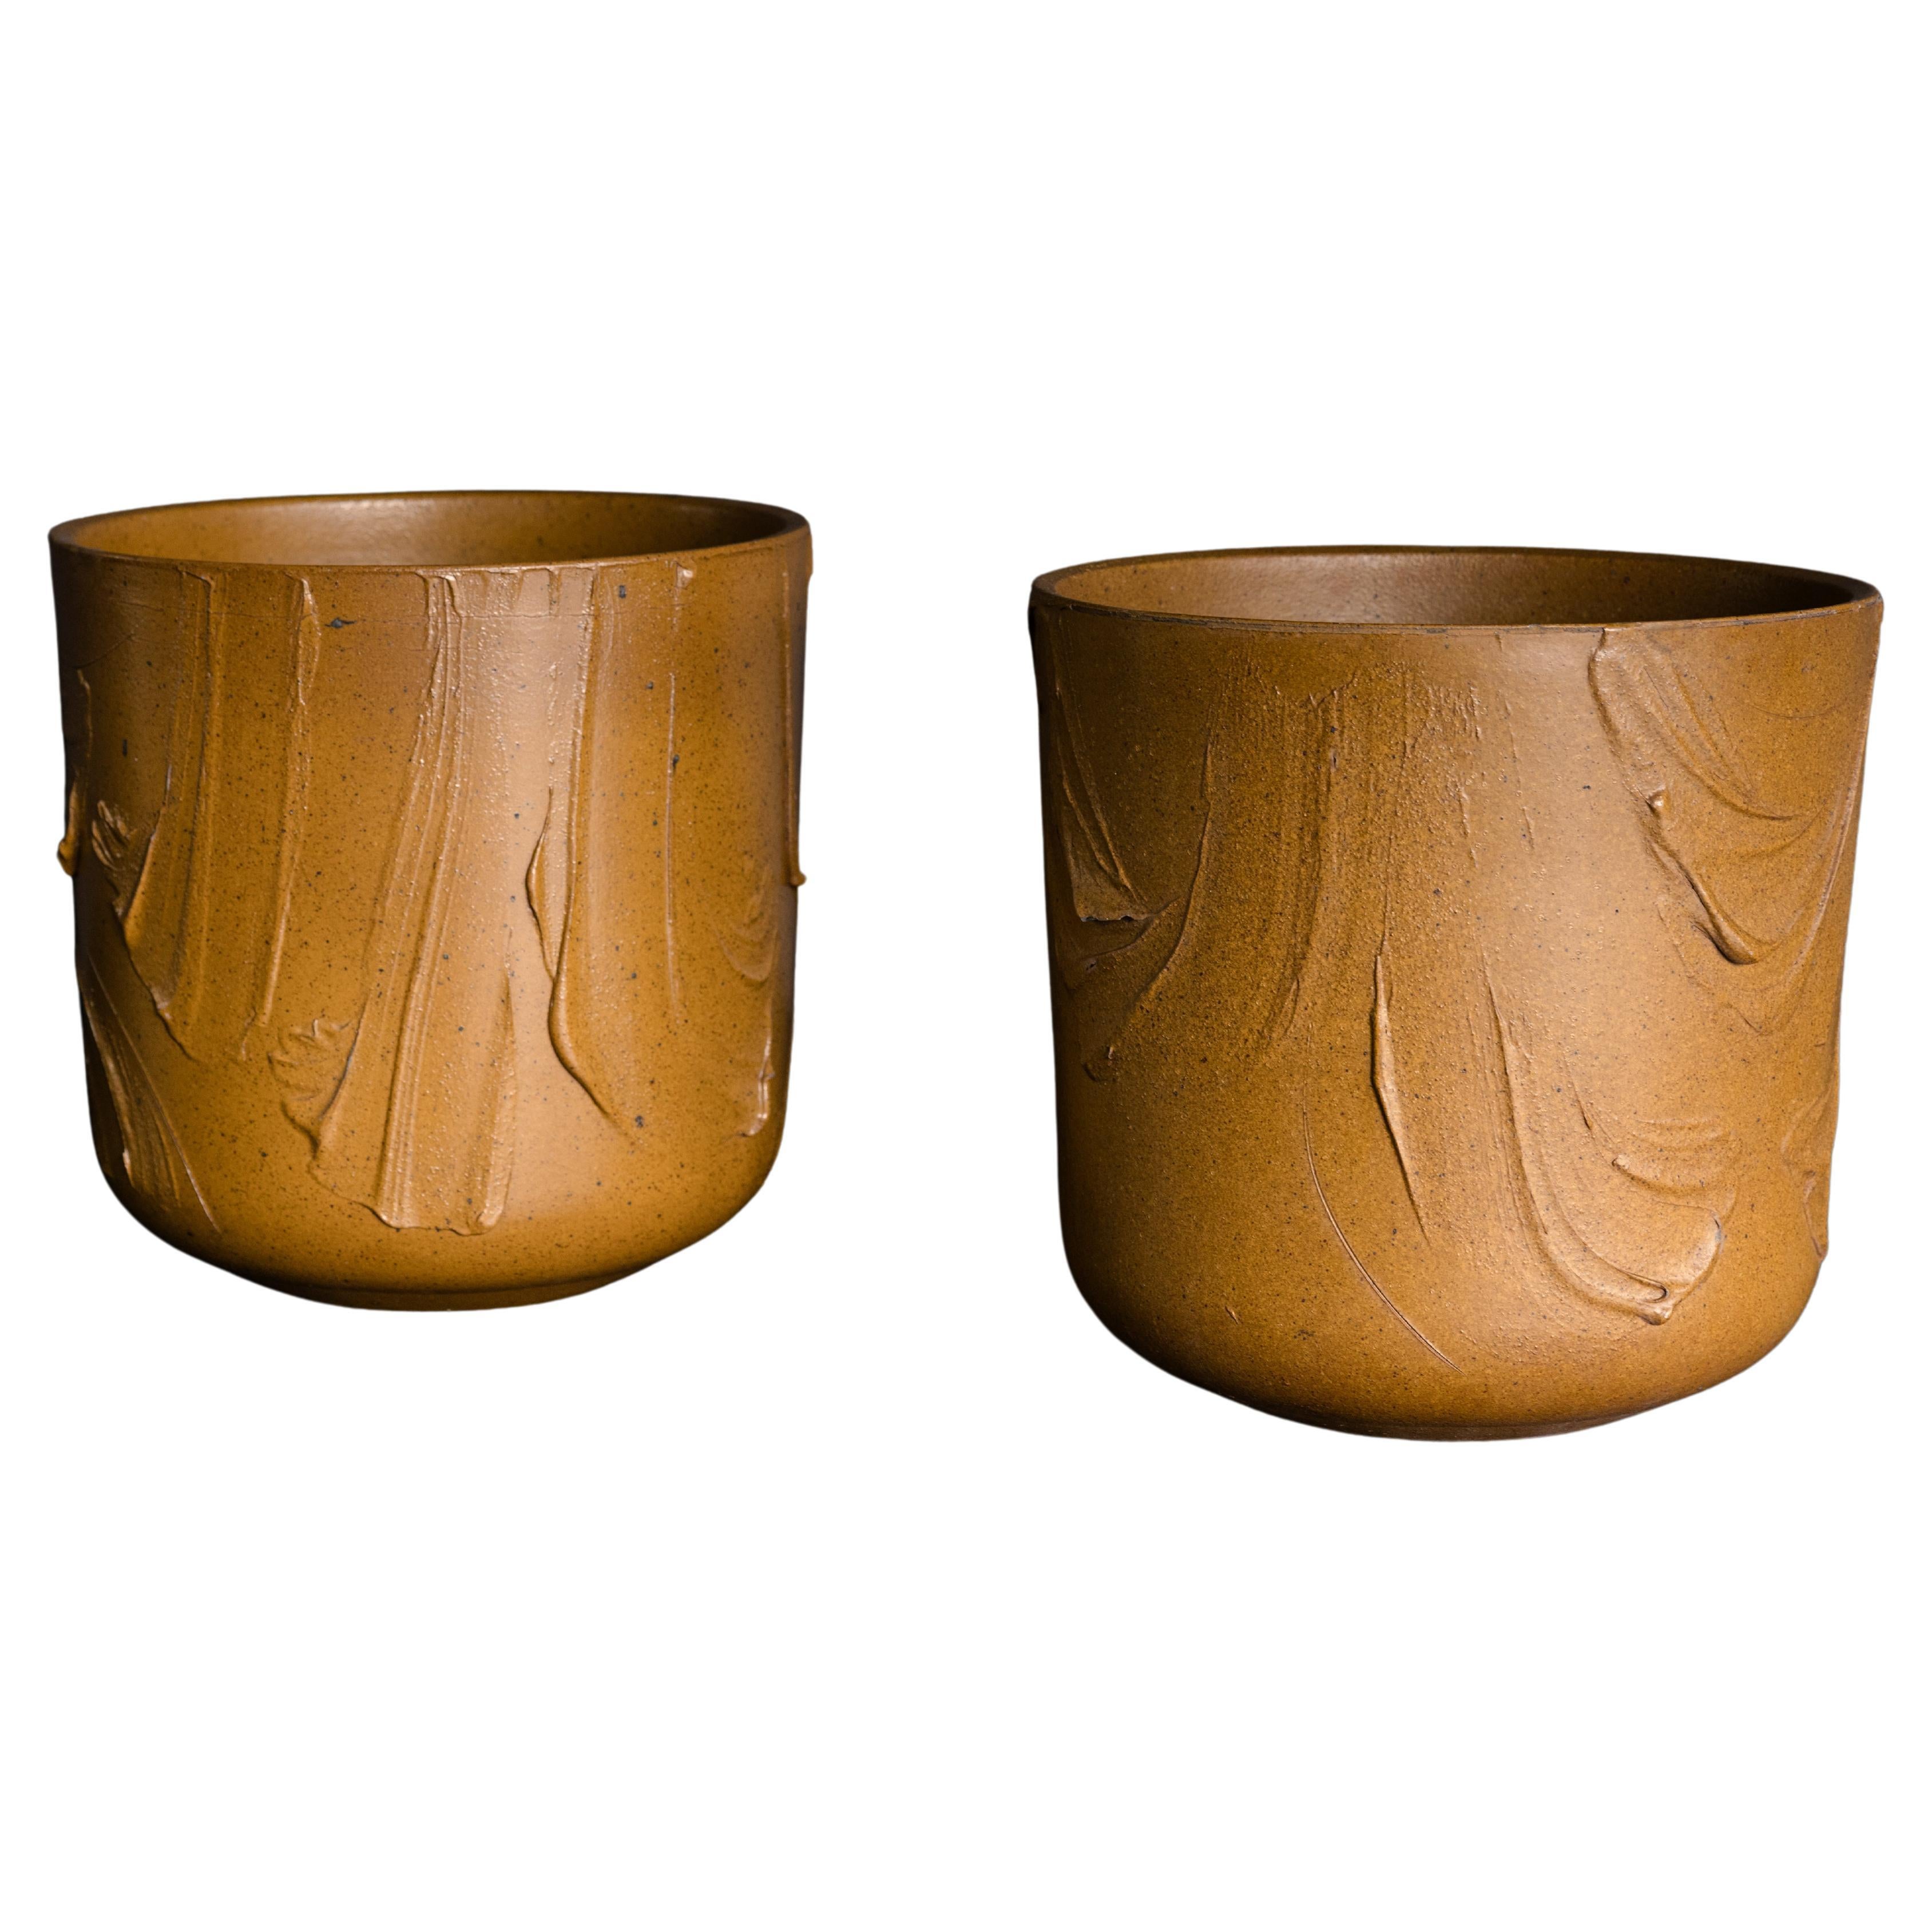 Model 4105 "Expressive" Pro/Artisan Planters by David Cressey for AP